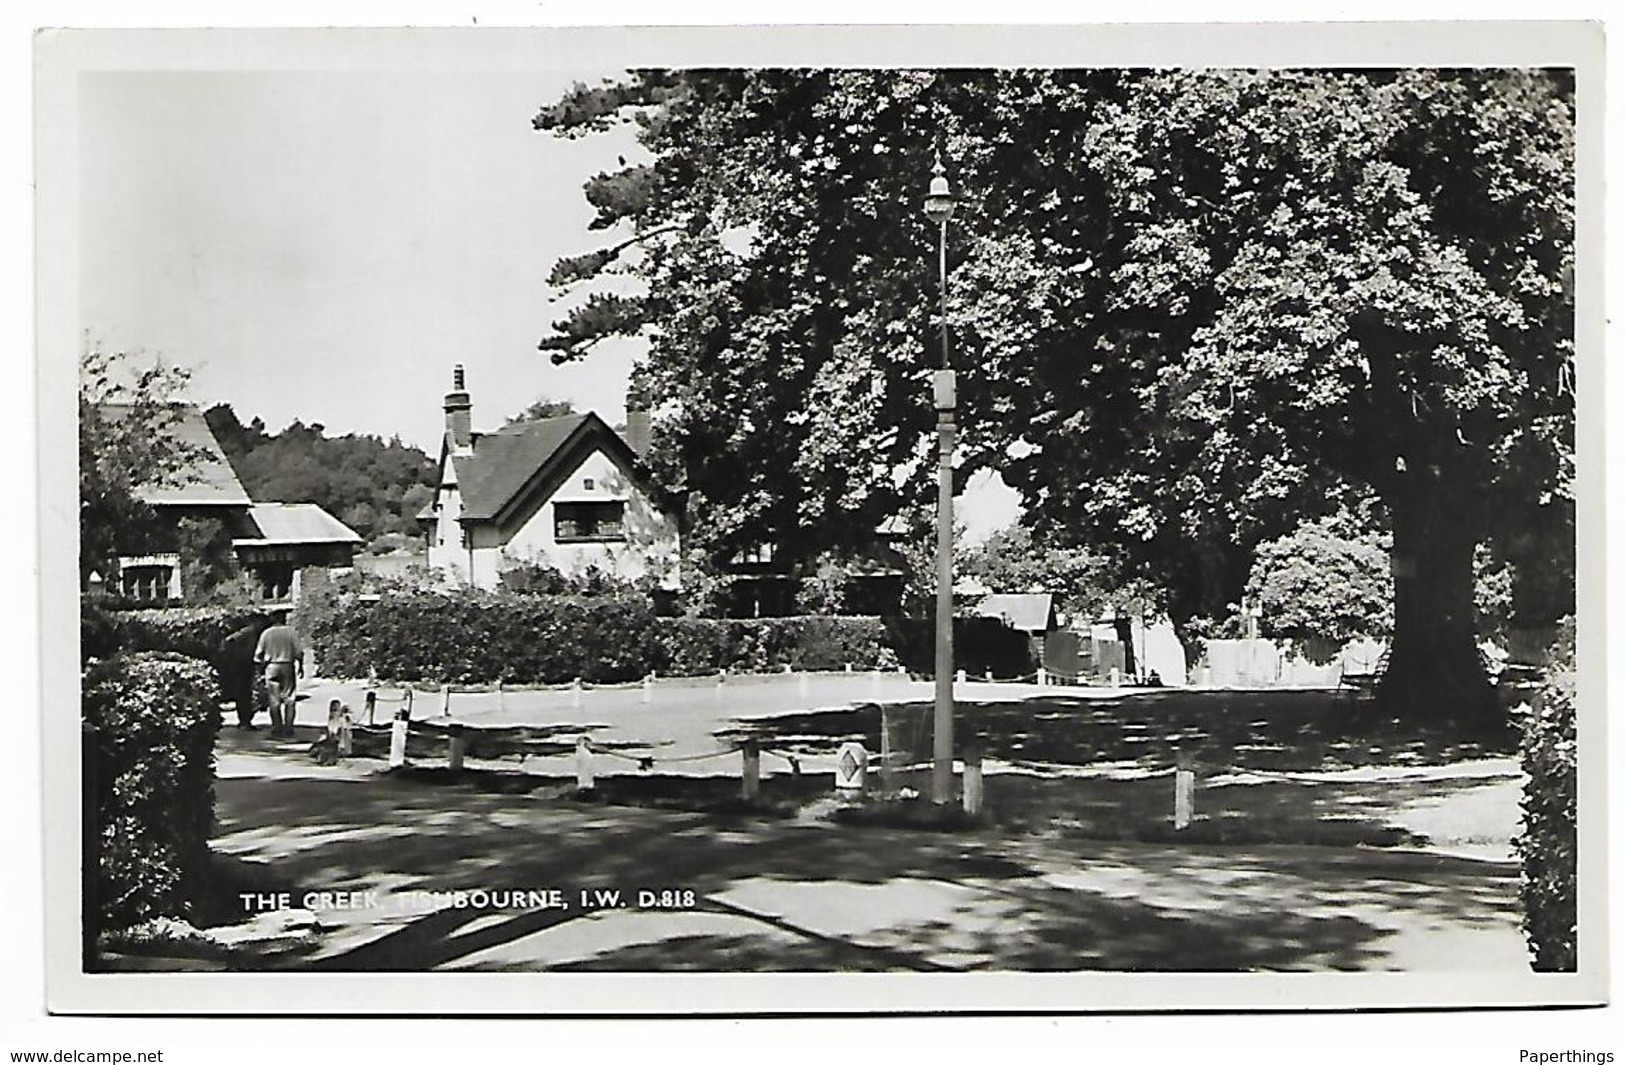 Real Photo Postcard, The Creek, Fishbourne, I.w. D.818. Houses, Street, Road, Landscape. - Chichester